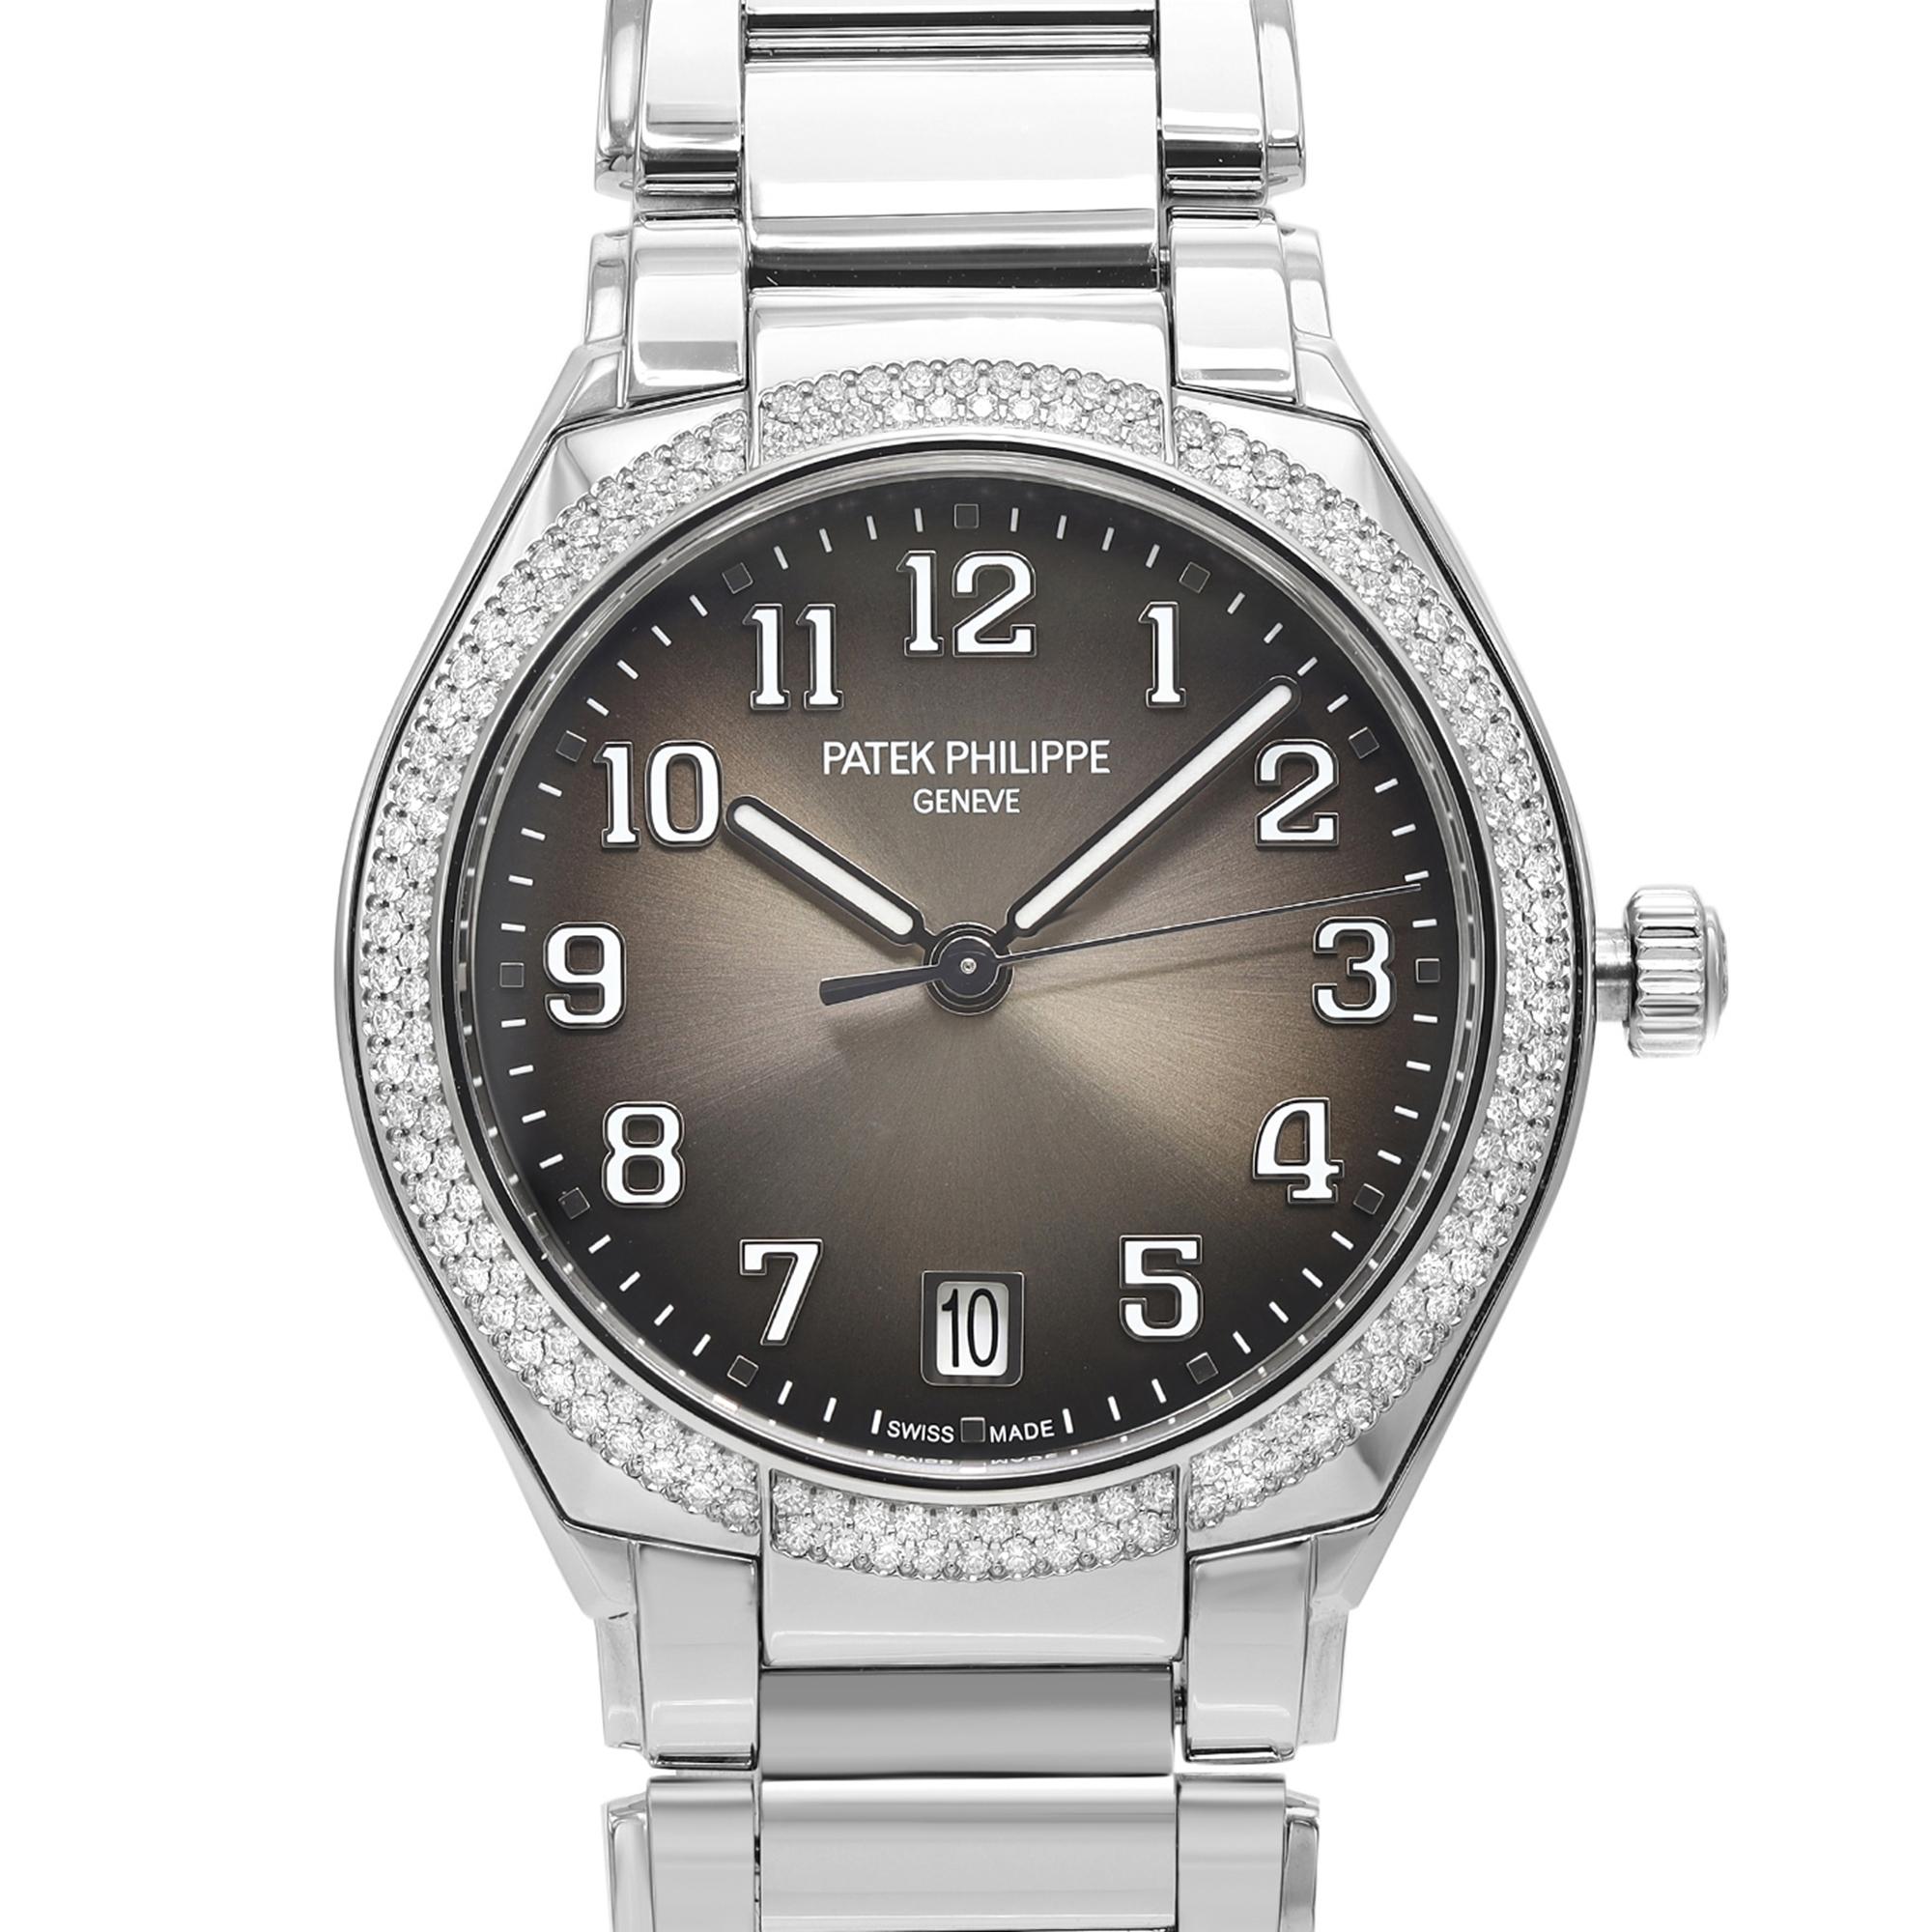 Brand new Patek Philippe Twenty 4 36mm Steel Gray Dial Ladies Watch 7300/1200A-010. This Beautiful Timepiece is Powered by an Automatic (Mechanical) Movement and Features: Round Stainless Steel Case and Bracelet. Stainless steel bezel set with 160